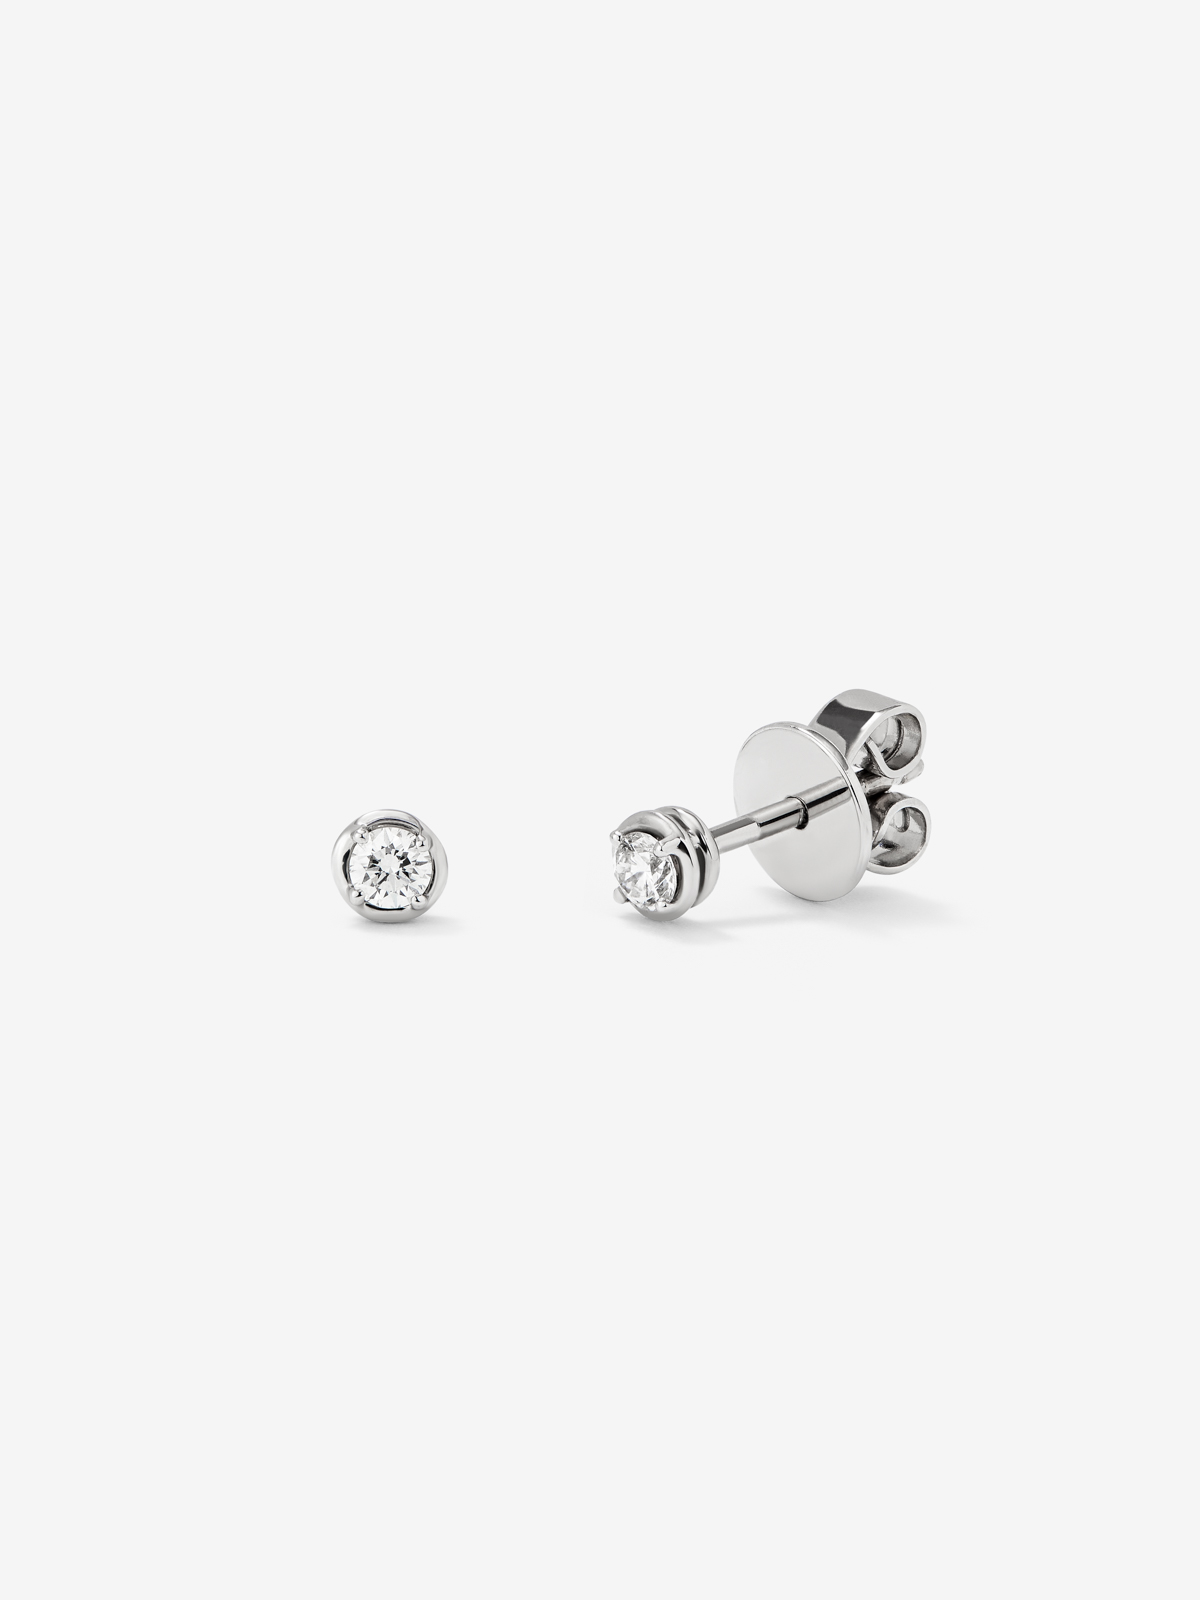 18K white gold earrings with solitaire diamond